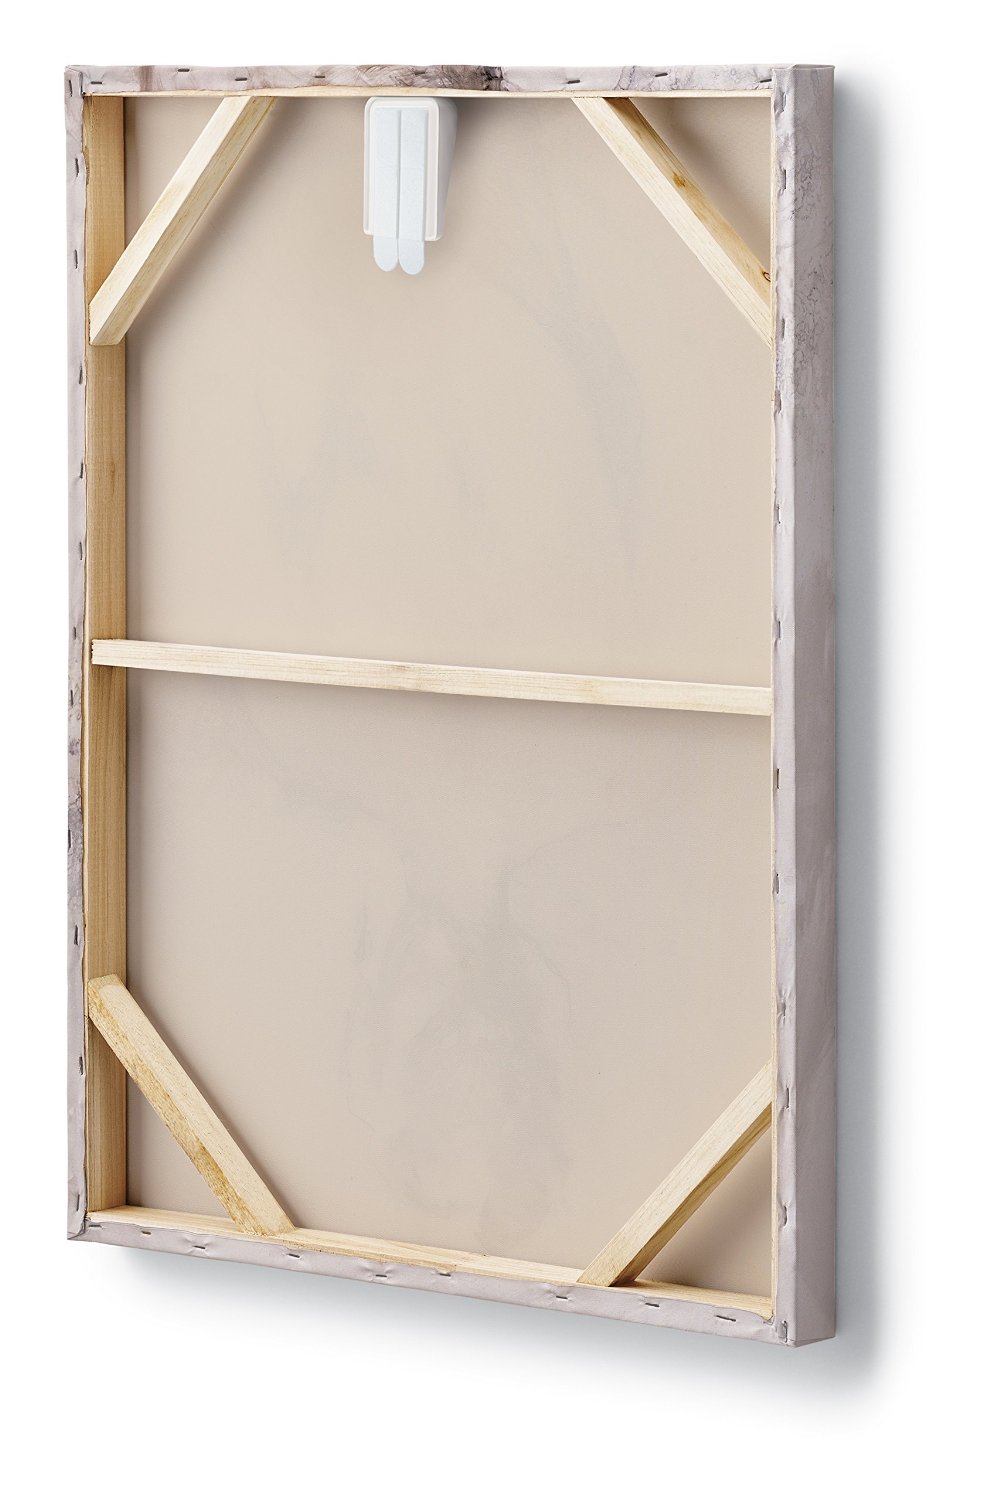 buy mirror / picture hangers at cheap rate in bulk. wholesale & retail builders hardware items store. home décor ideas, maintenance, repair replacement parts